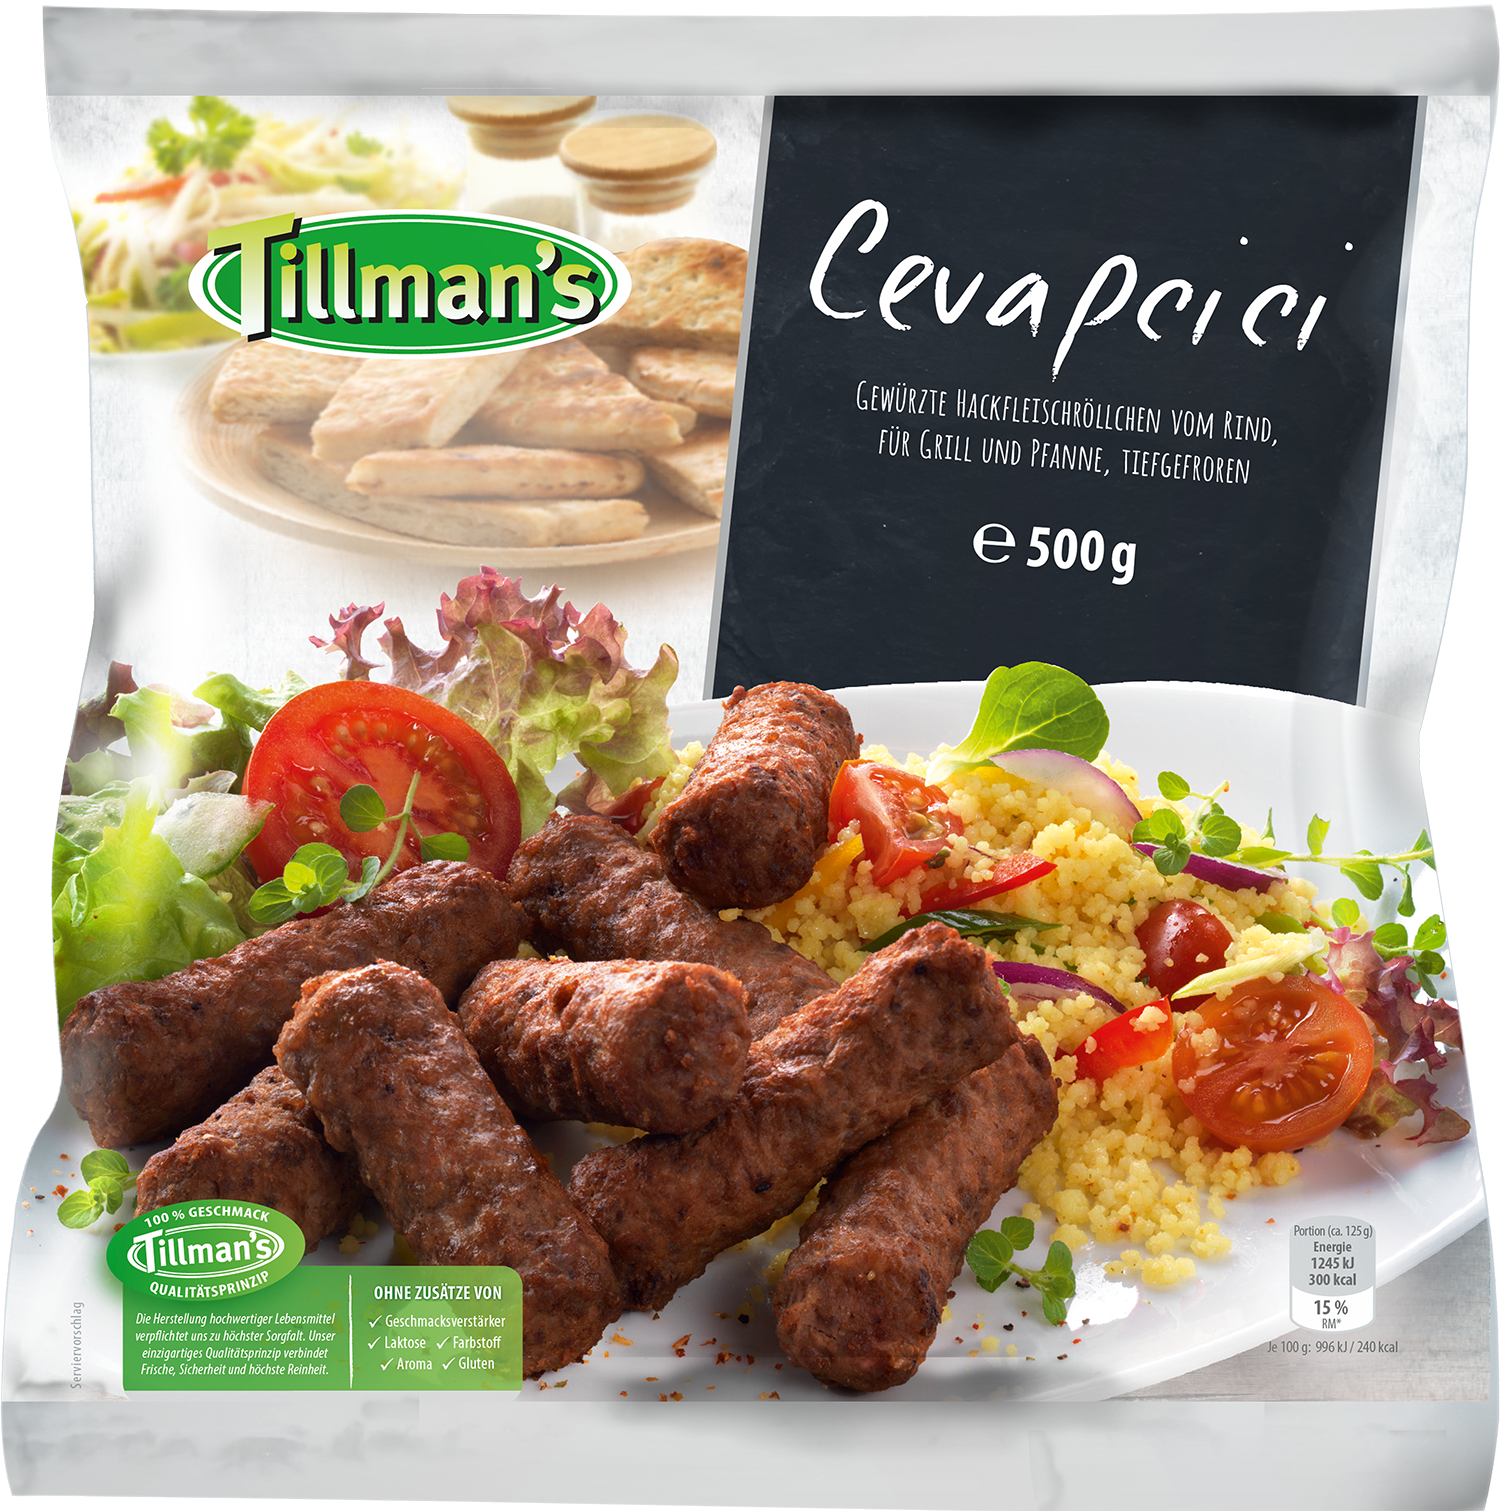 Cevapcici vom Rind - 500g (500 grams) Tillman\'s Convenience GmbH Beef -  Prepared/Processed Food / Beverage / Tobacco Meat/Poultry/Sausages  Meat/Poultry - Prepared/Processed · mynetfair